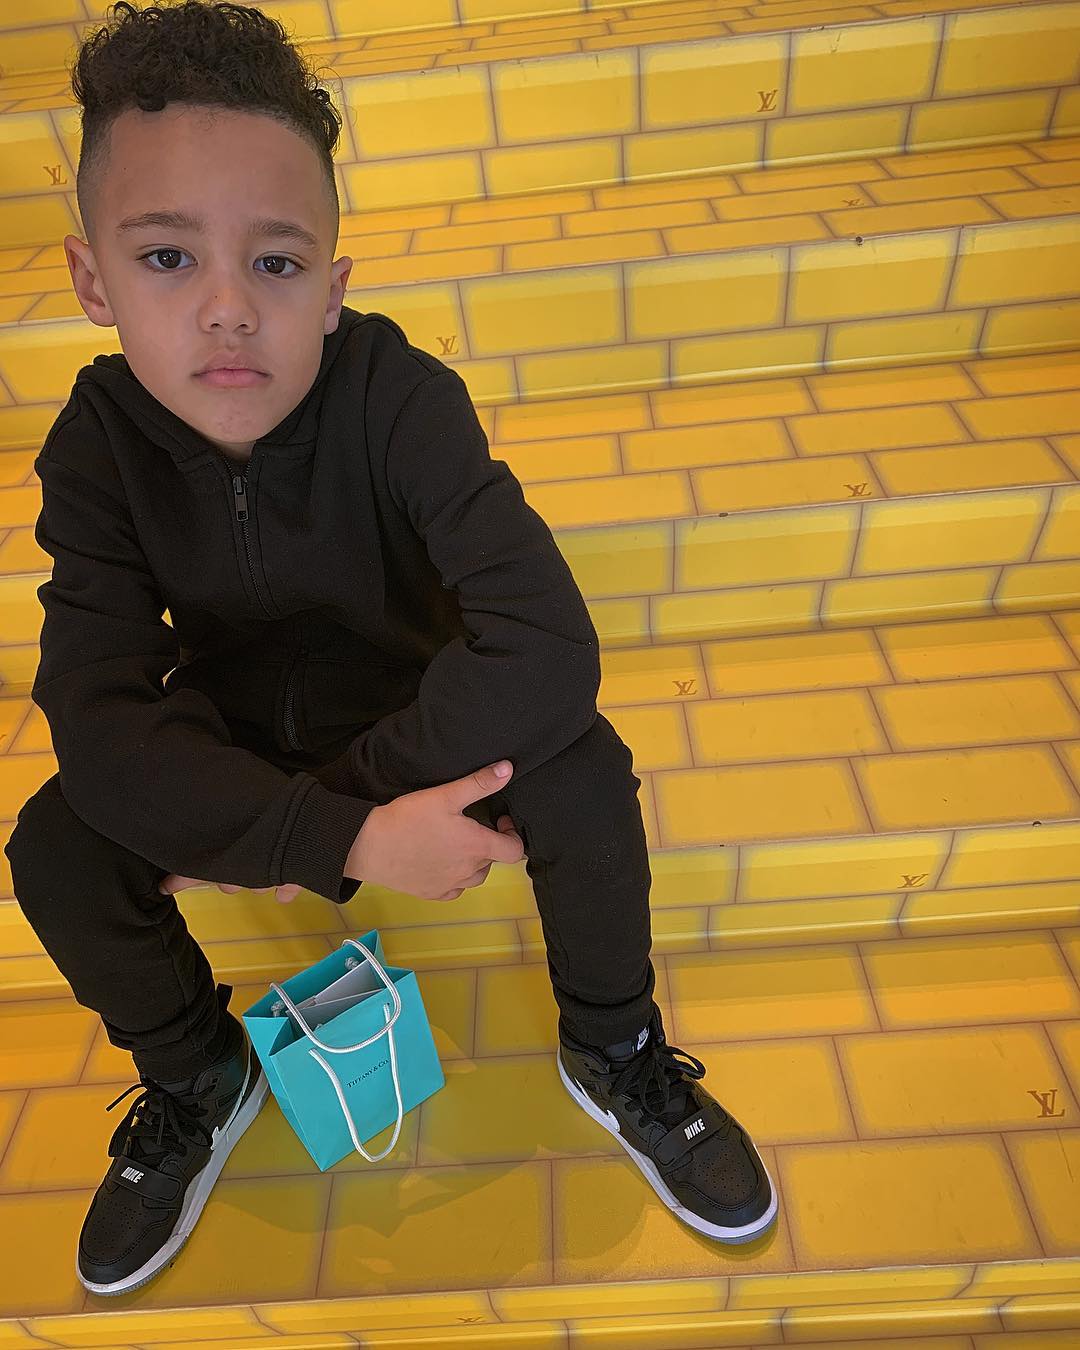 North West's 7-year-old Boyfriend Is Already Getting Her Tiffany & Co. gifts